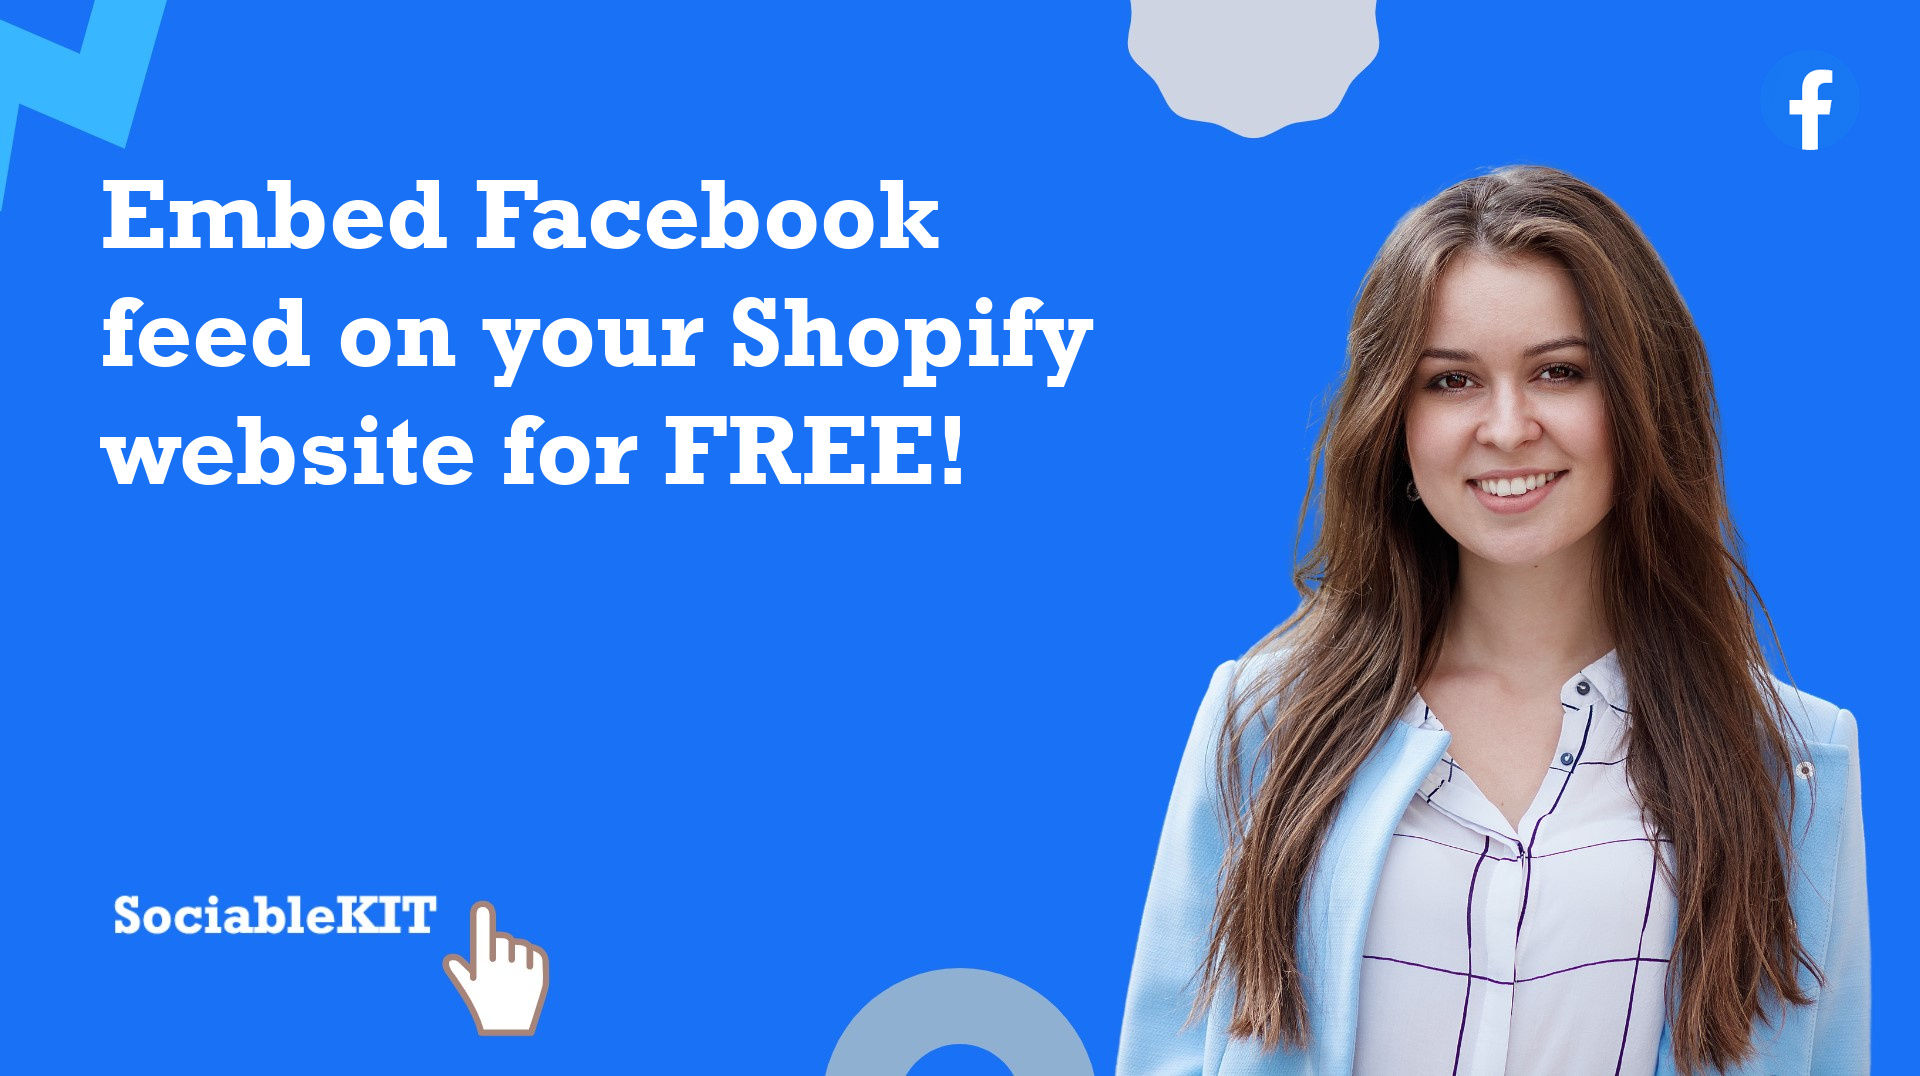 How to embed Facebook feed on your Shopify website for FREE?